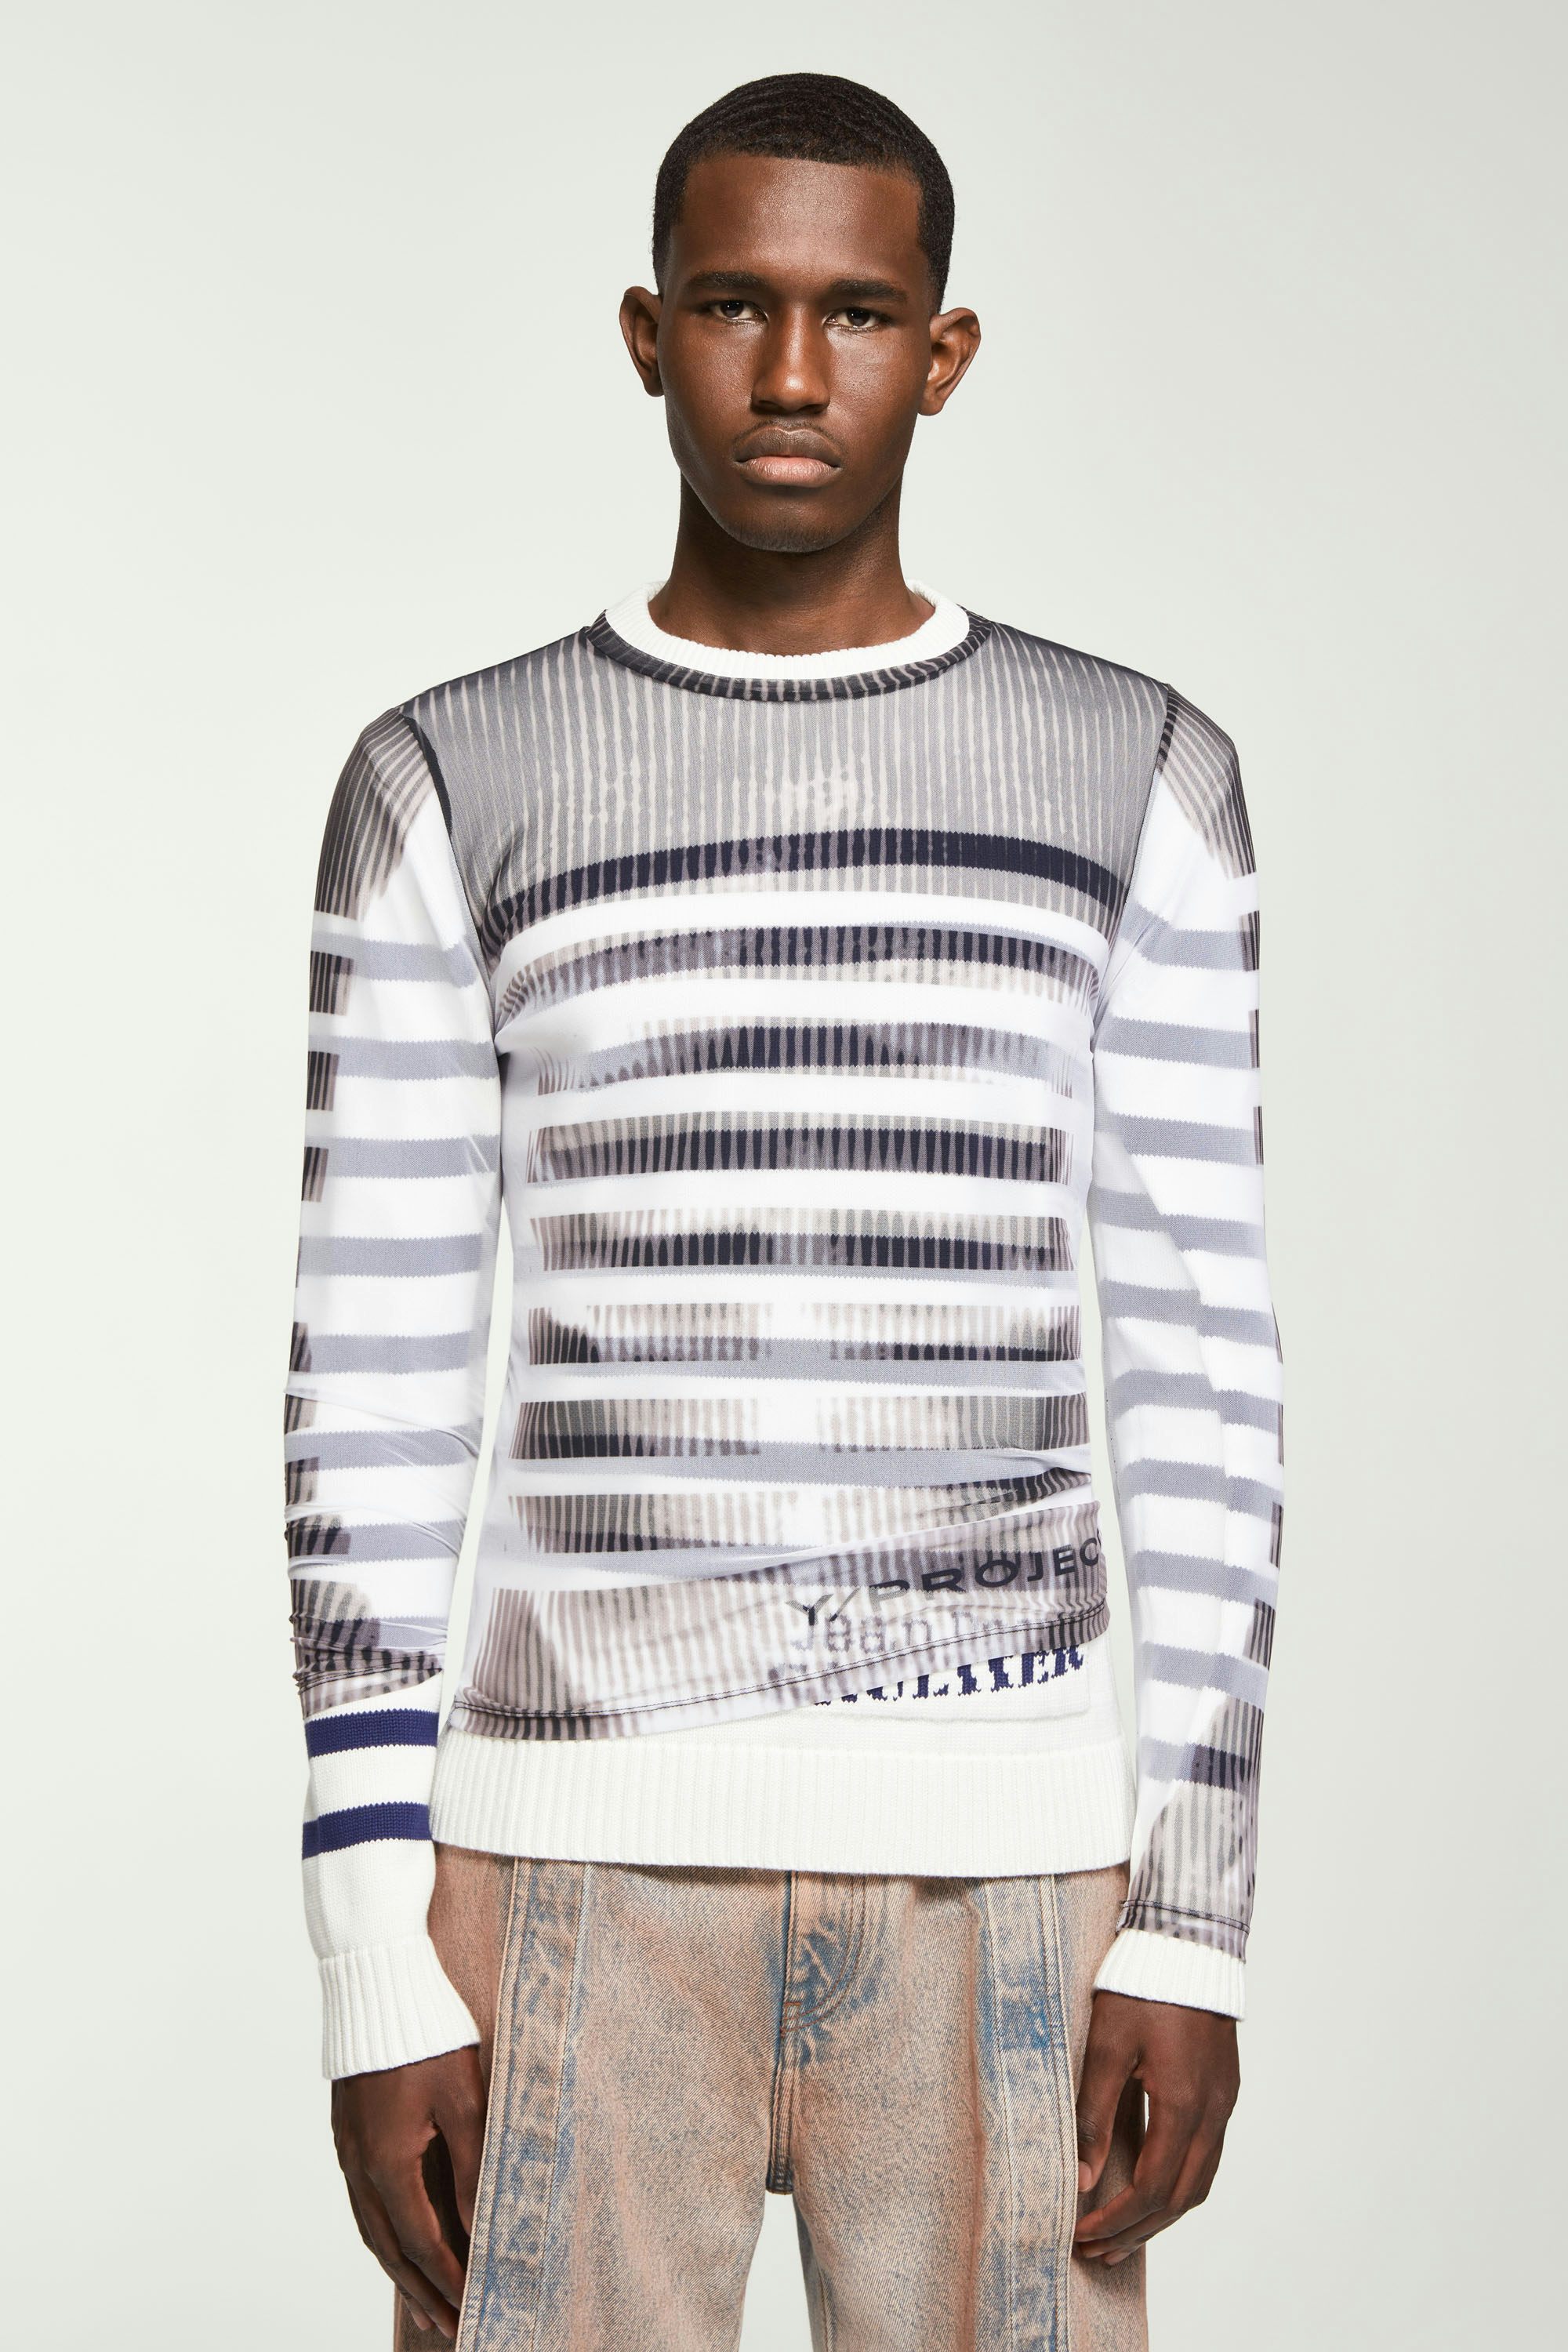 The White & Black Marinière Sweater by Jean Paul Gaultier x Y/Project